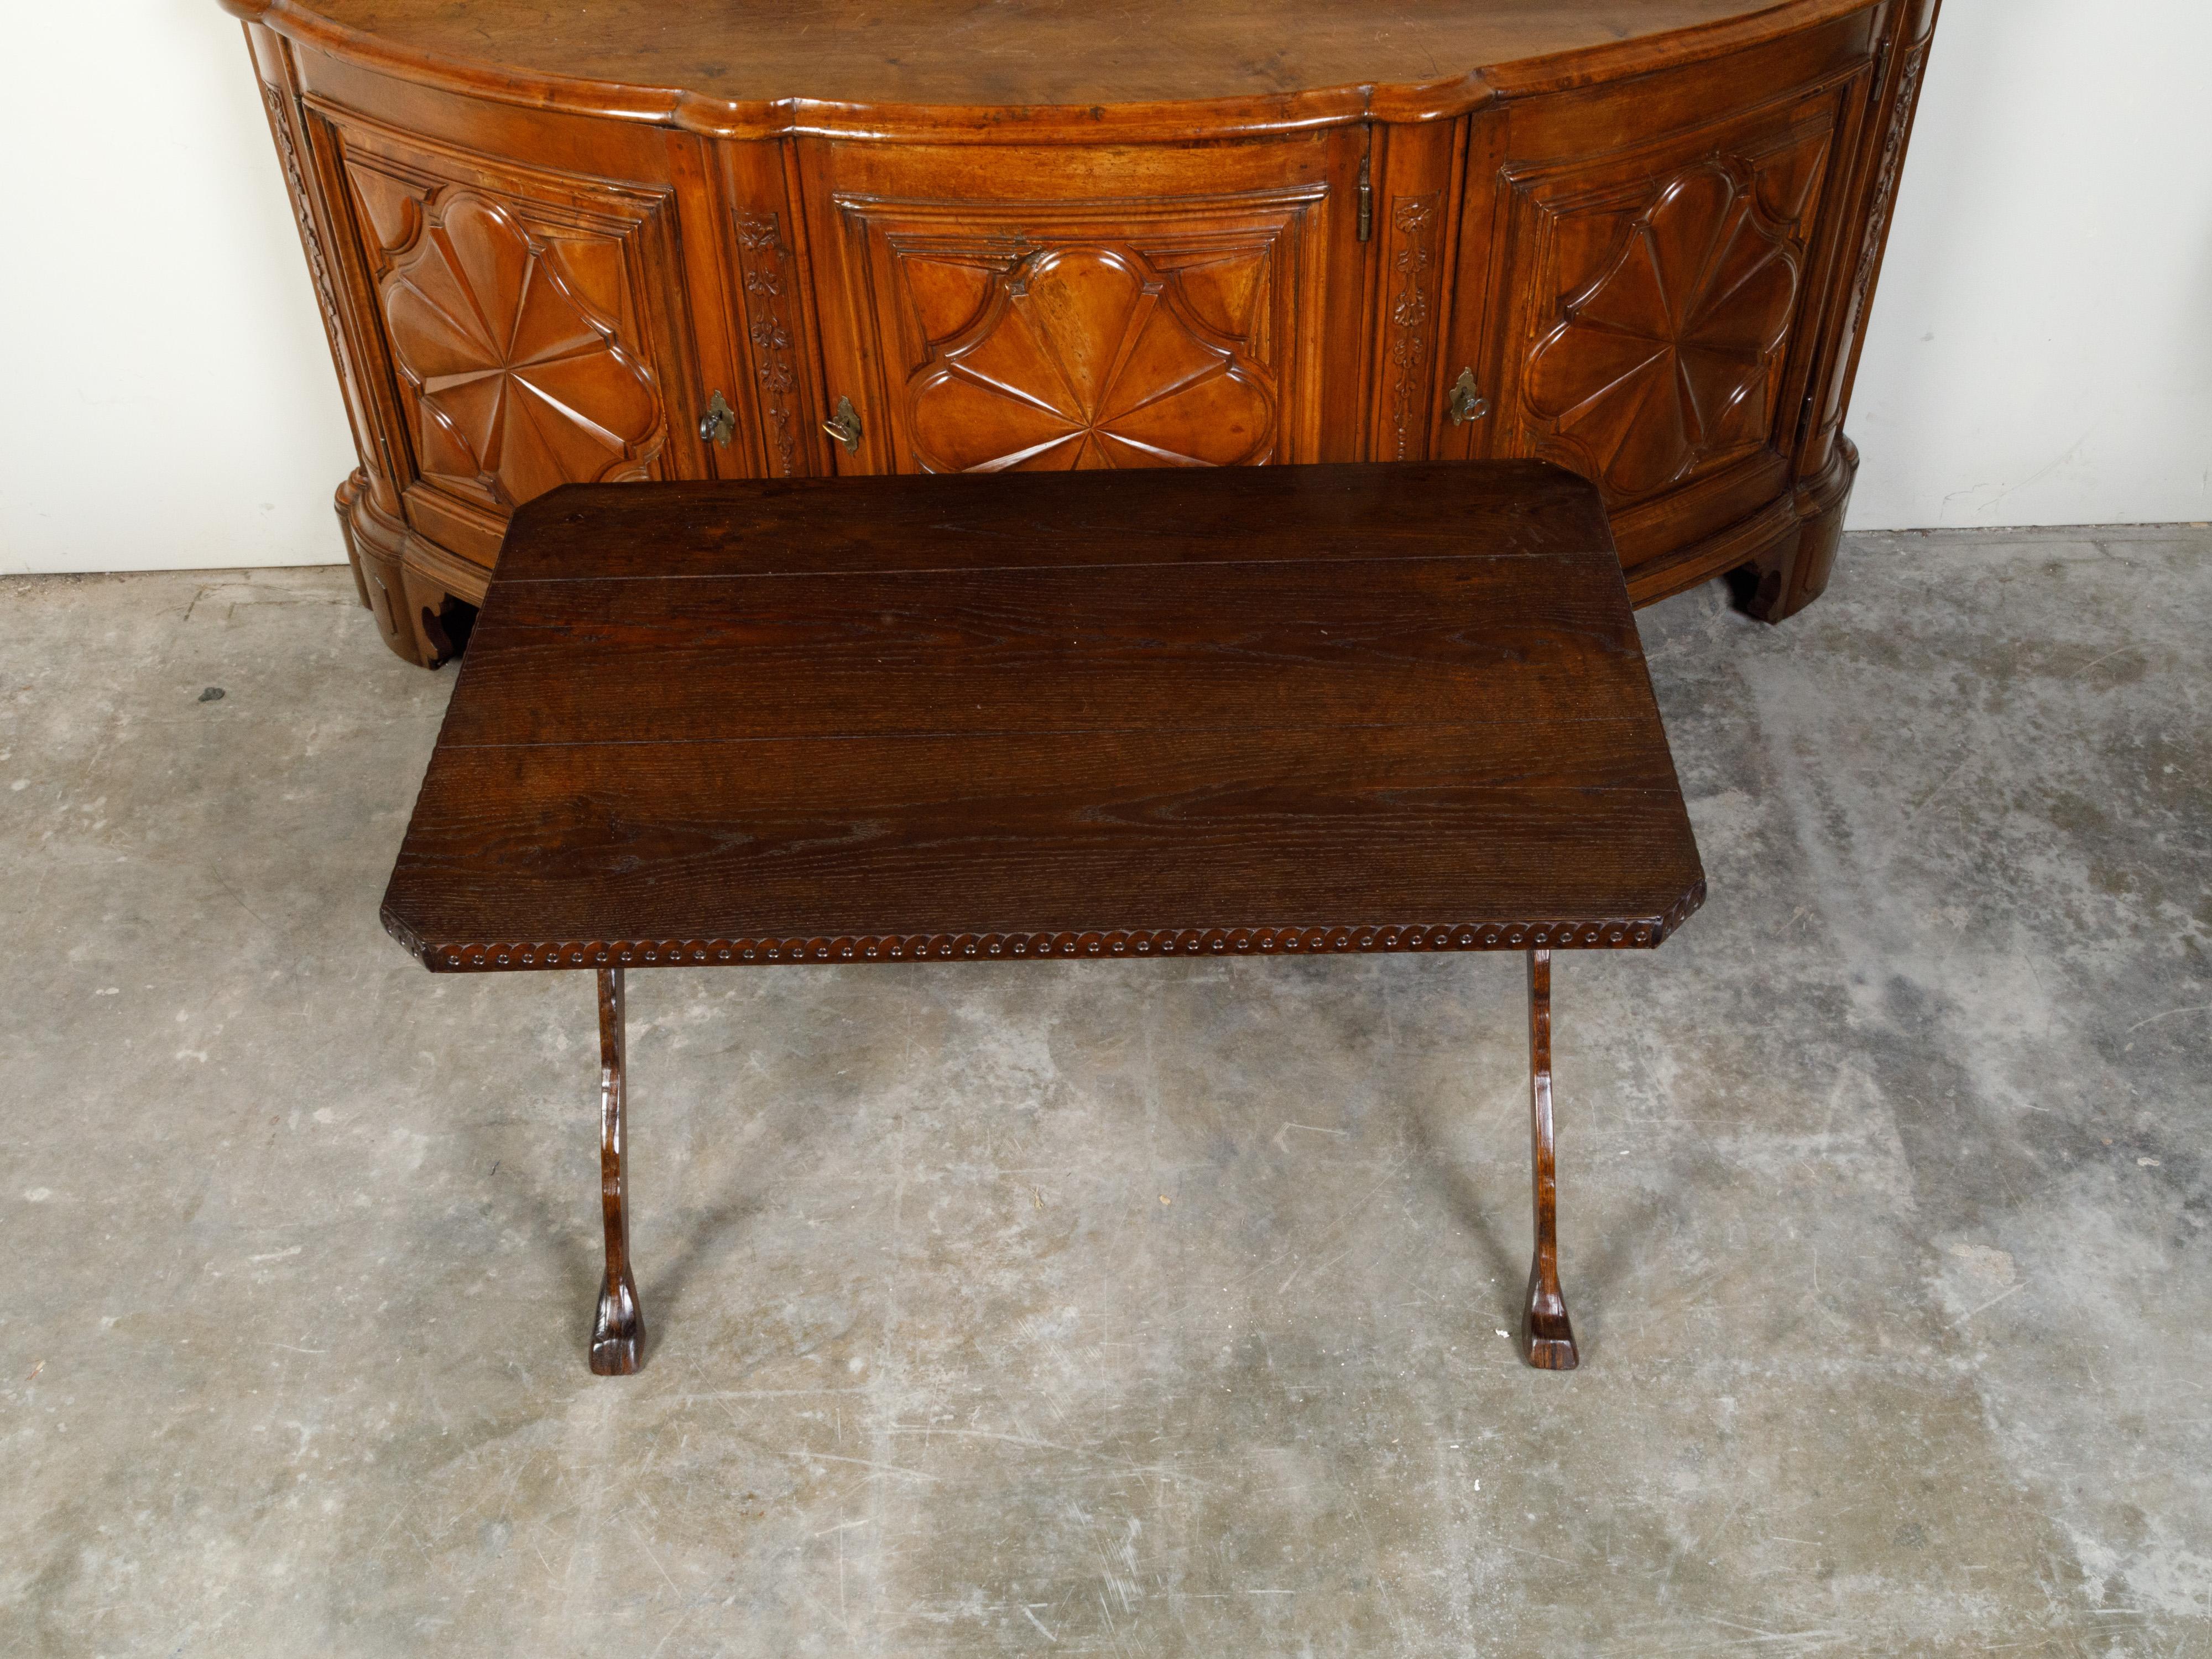 Italian 19th Century Oak Side Table with Carved Guilloche Frieze and X-Form Legs In Good Condition For Sale In Atlanta, GA